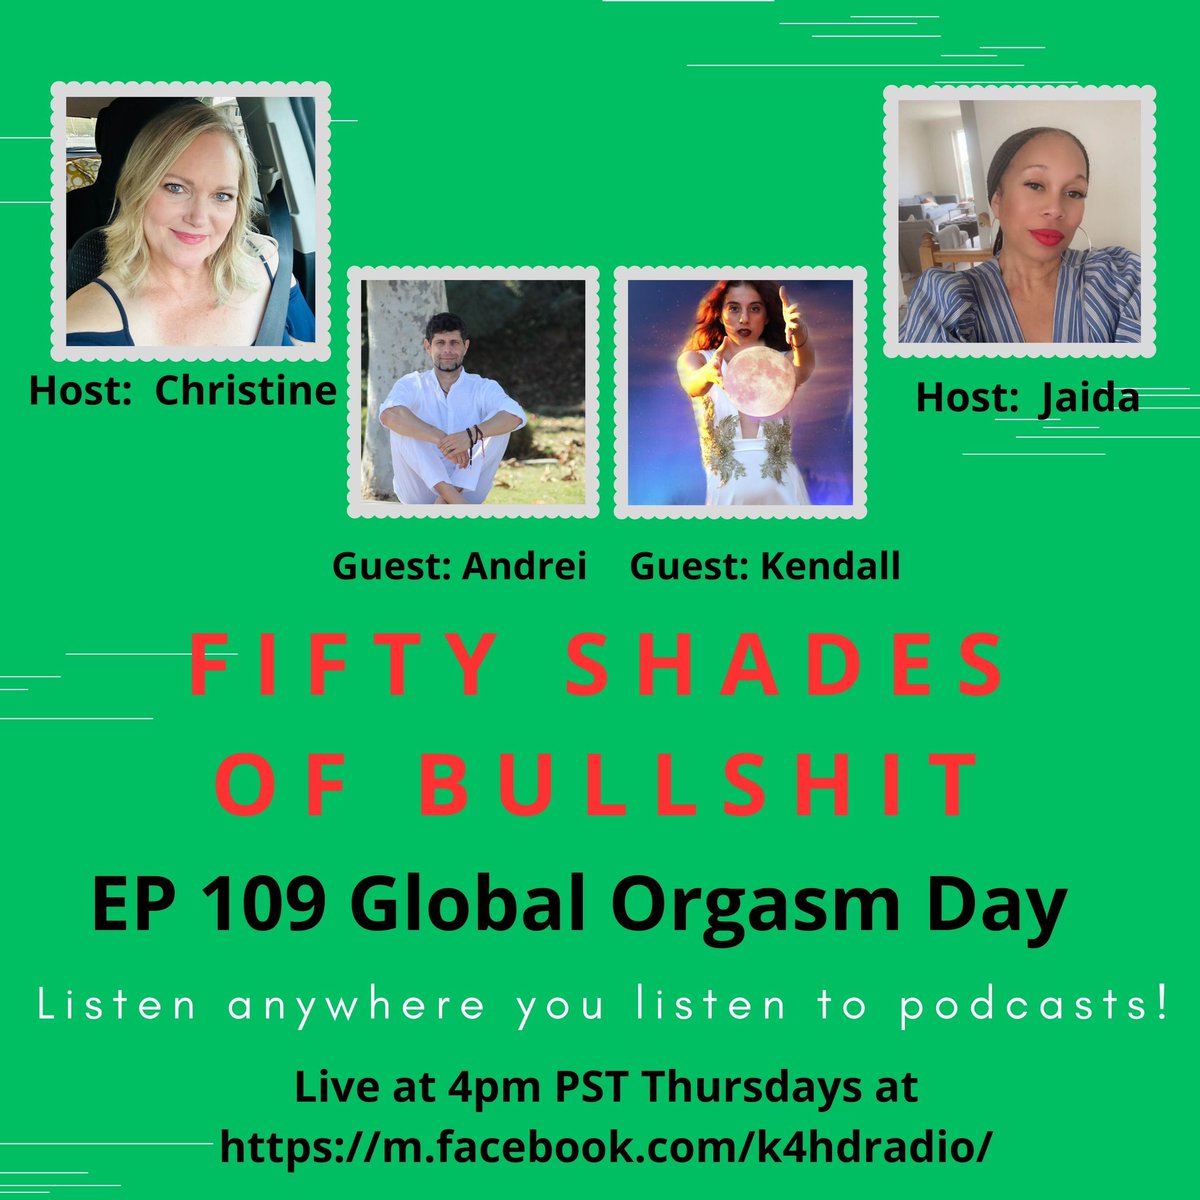 Had so much fun on the Fifty Shades of Bullshyt podcast today discussing the #Solstice, #SexMagic, and #GlobalOrgasmDay!  Catch the replay at facebook.com/k4hdradio

#Magick #Witchcraft #Tantra #Tantric #SexPriestess #DivineFeminine #RoseCodes #SacredSexuality #Sexvangelical